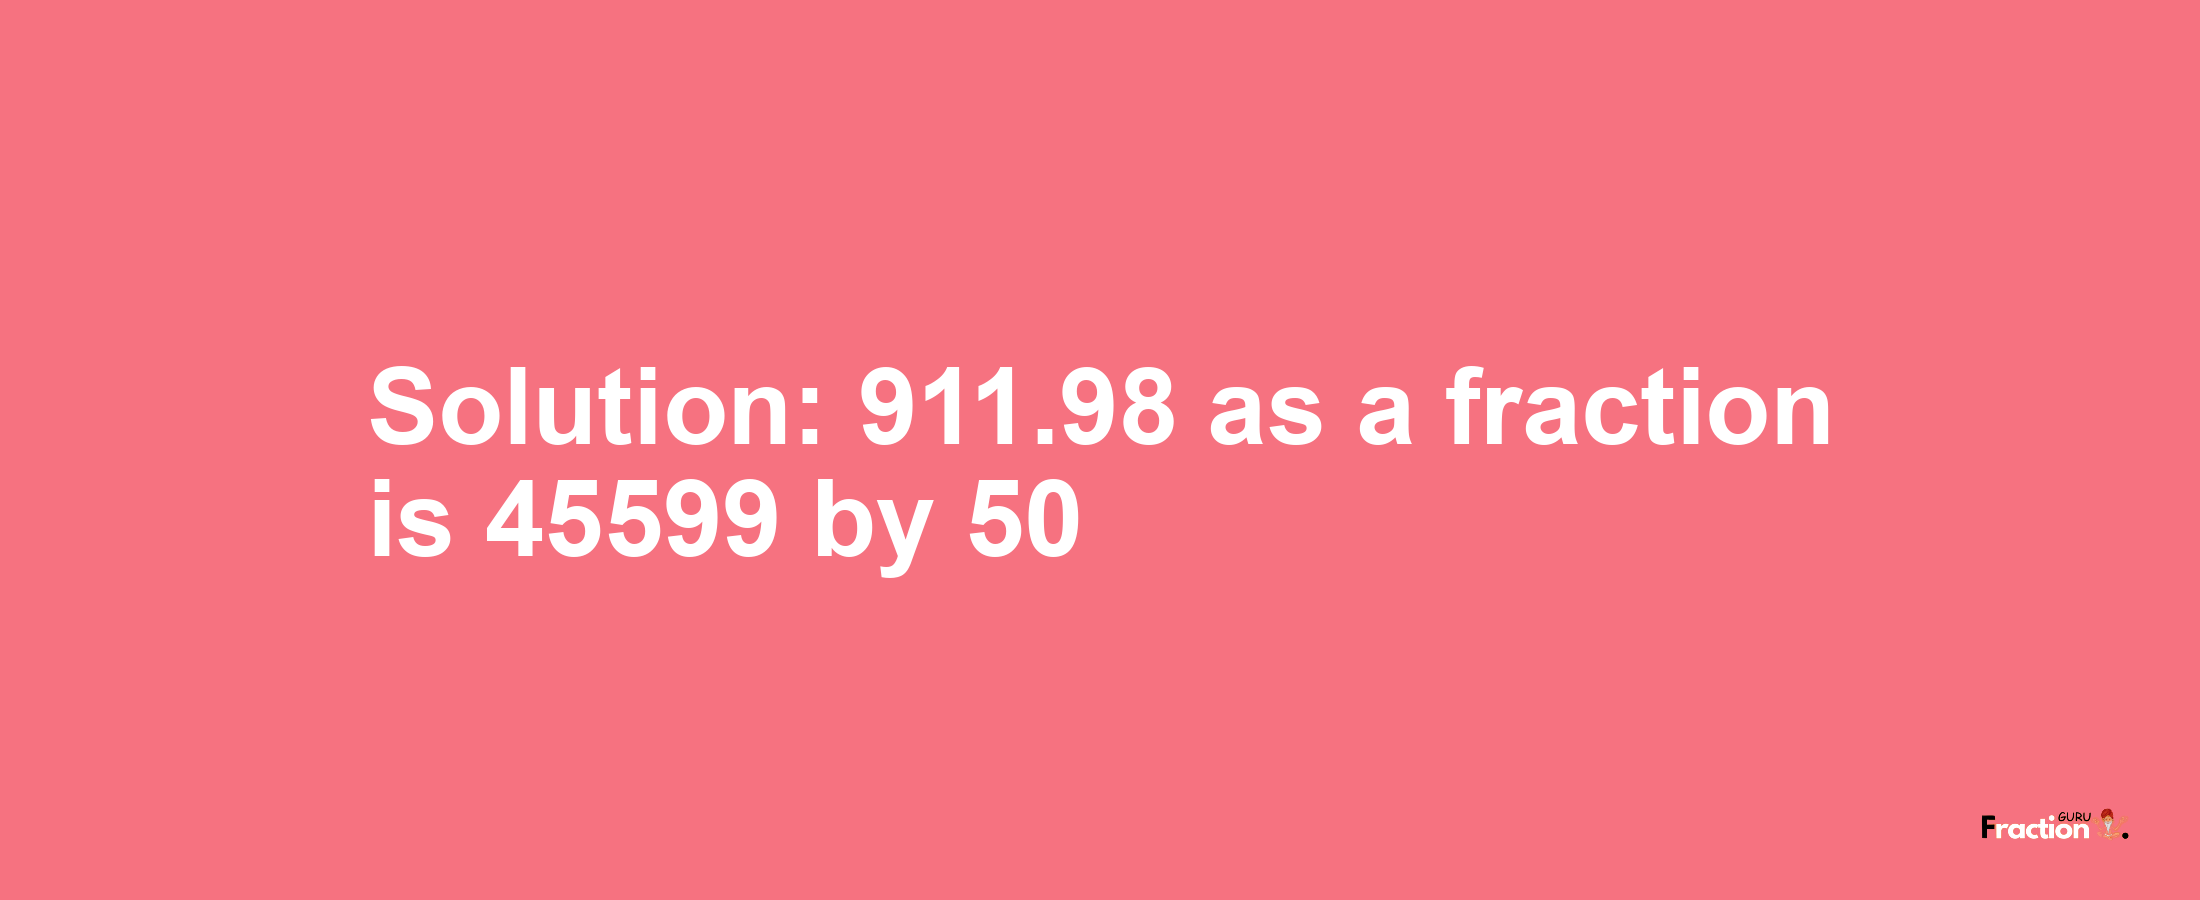 Solution:911.98 as a fraction is 45599/50